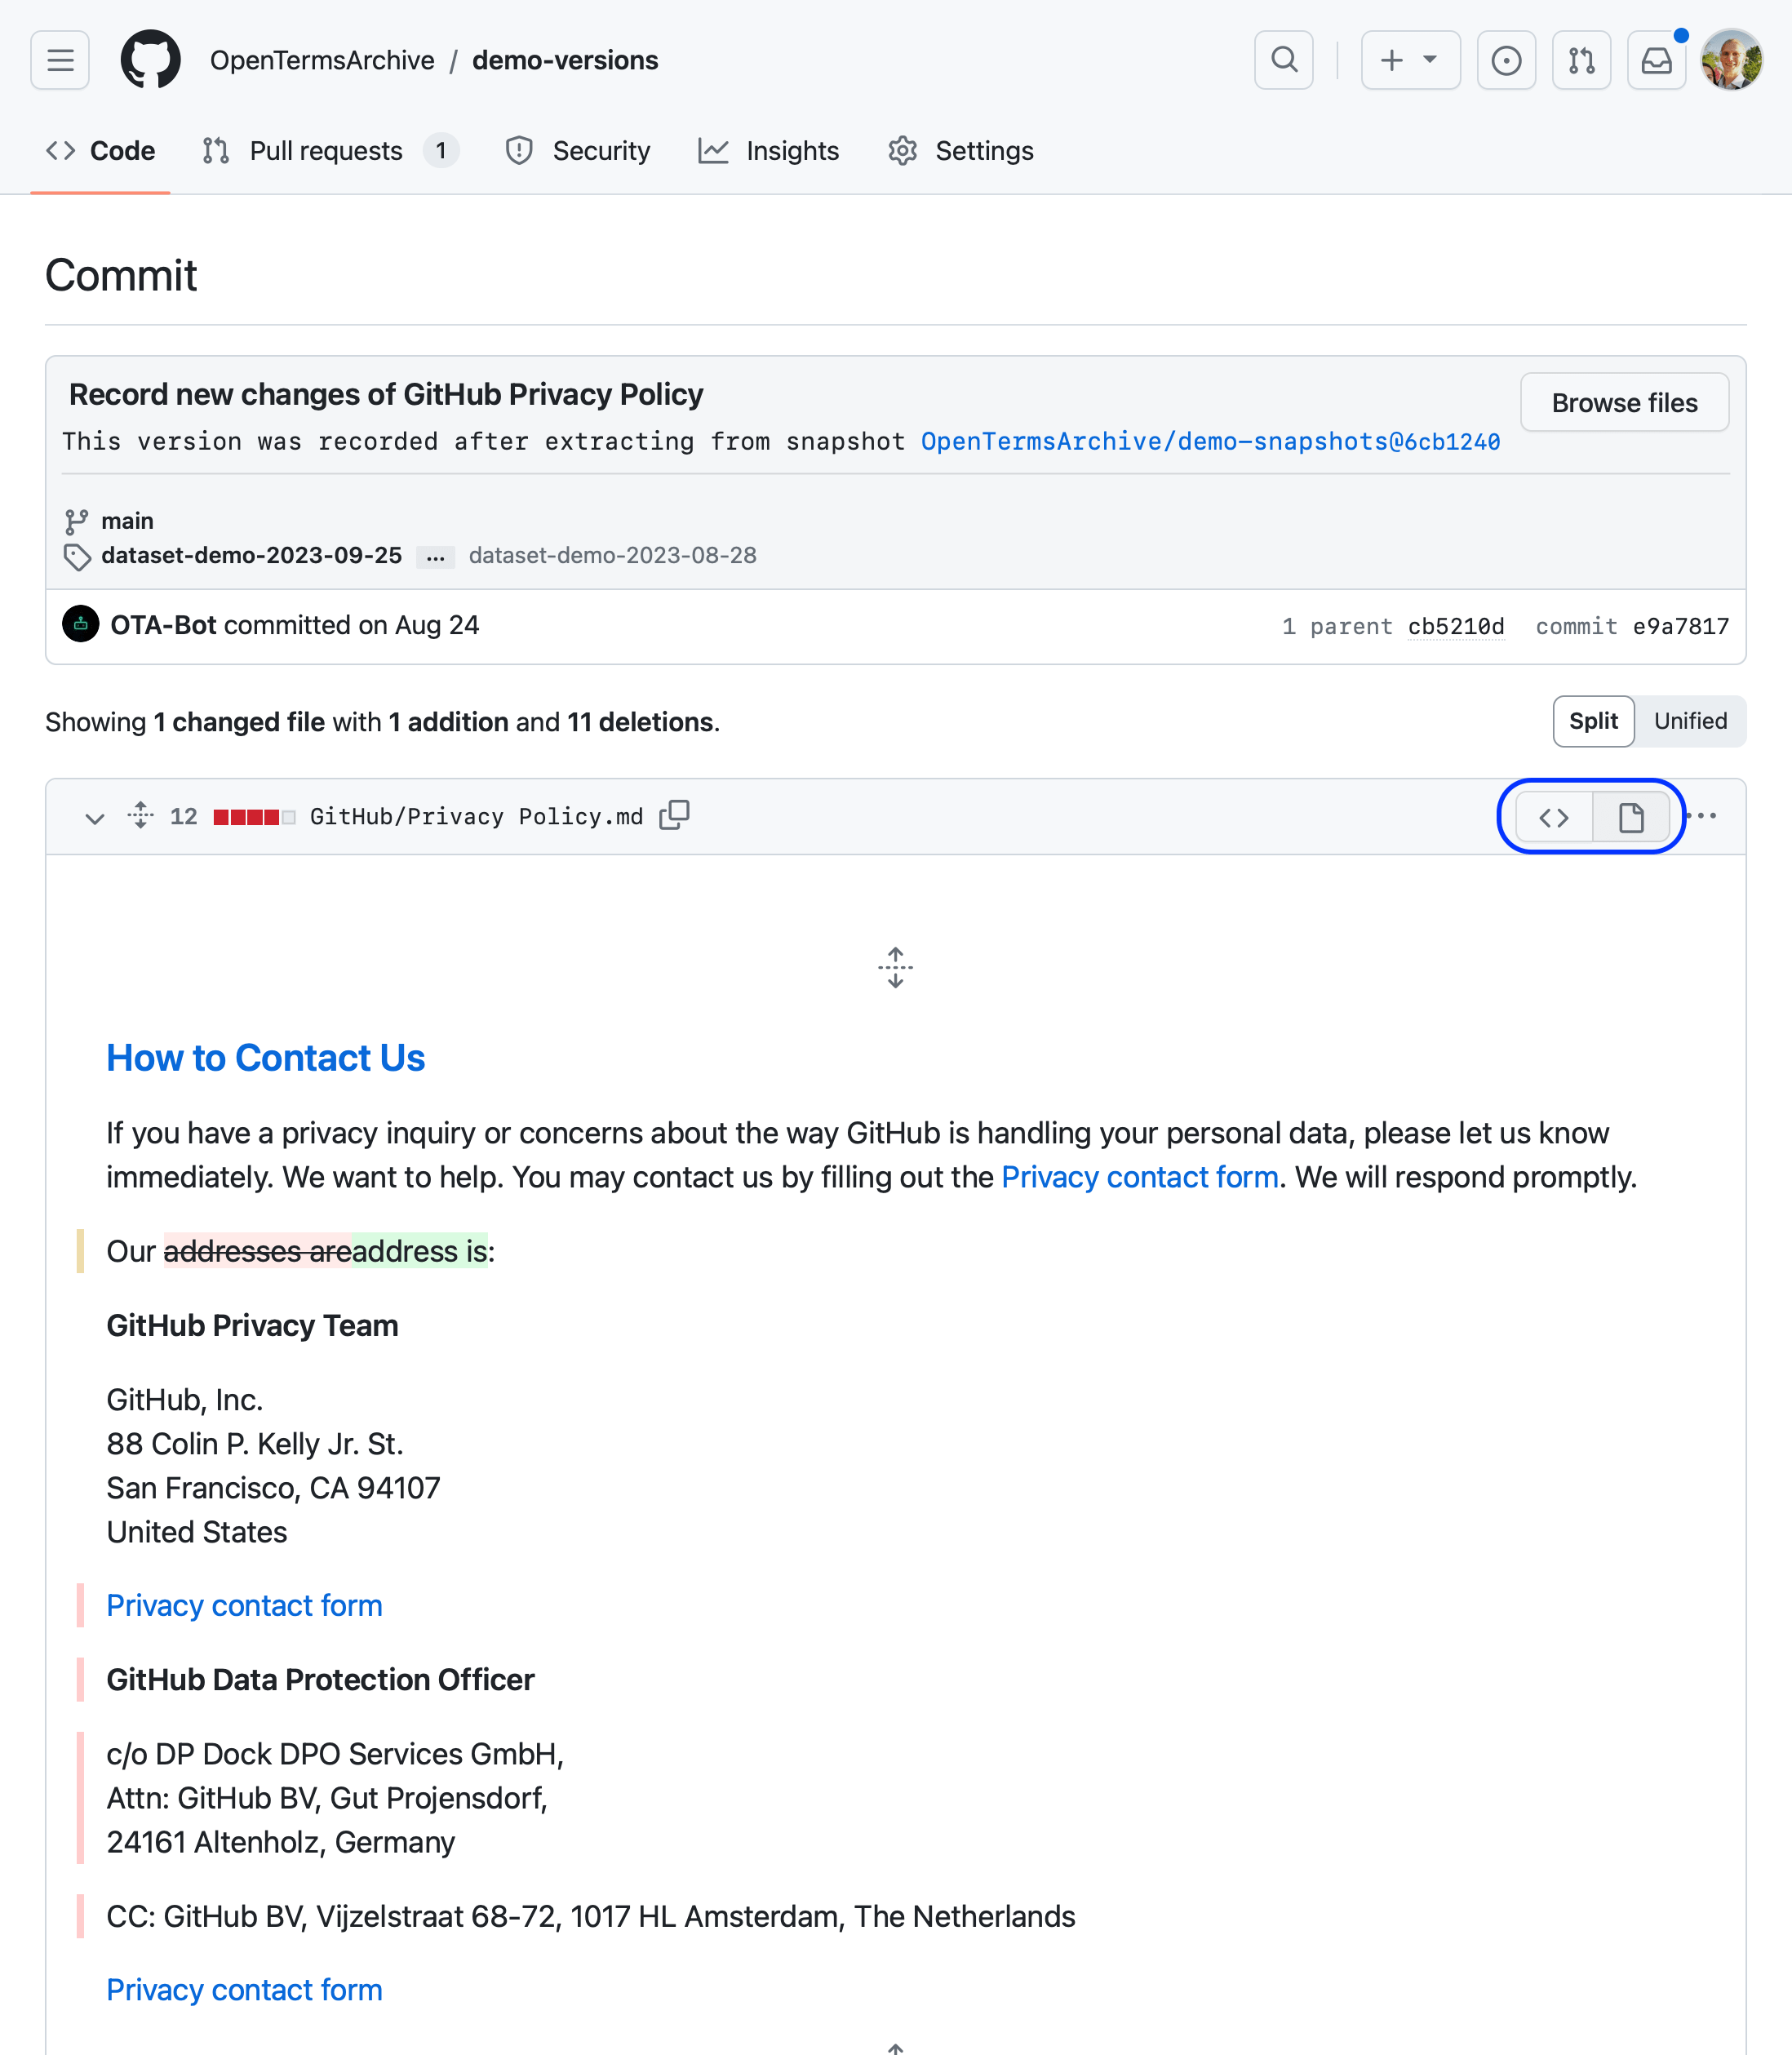 One GitHub Privacy Policy change with rich diff view